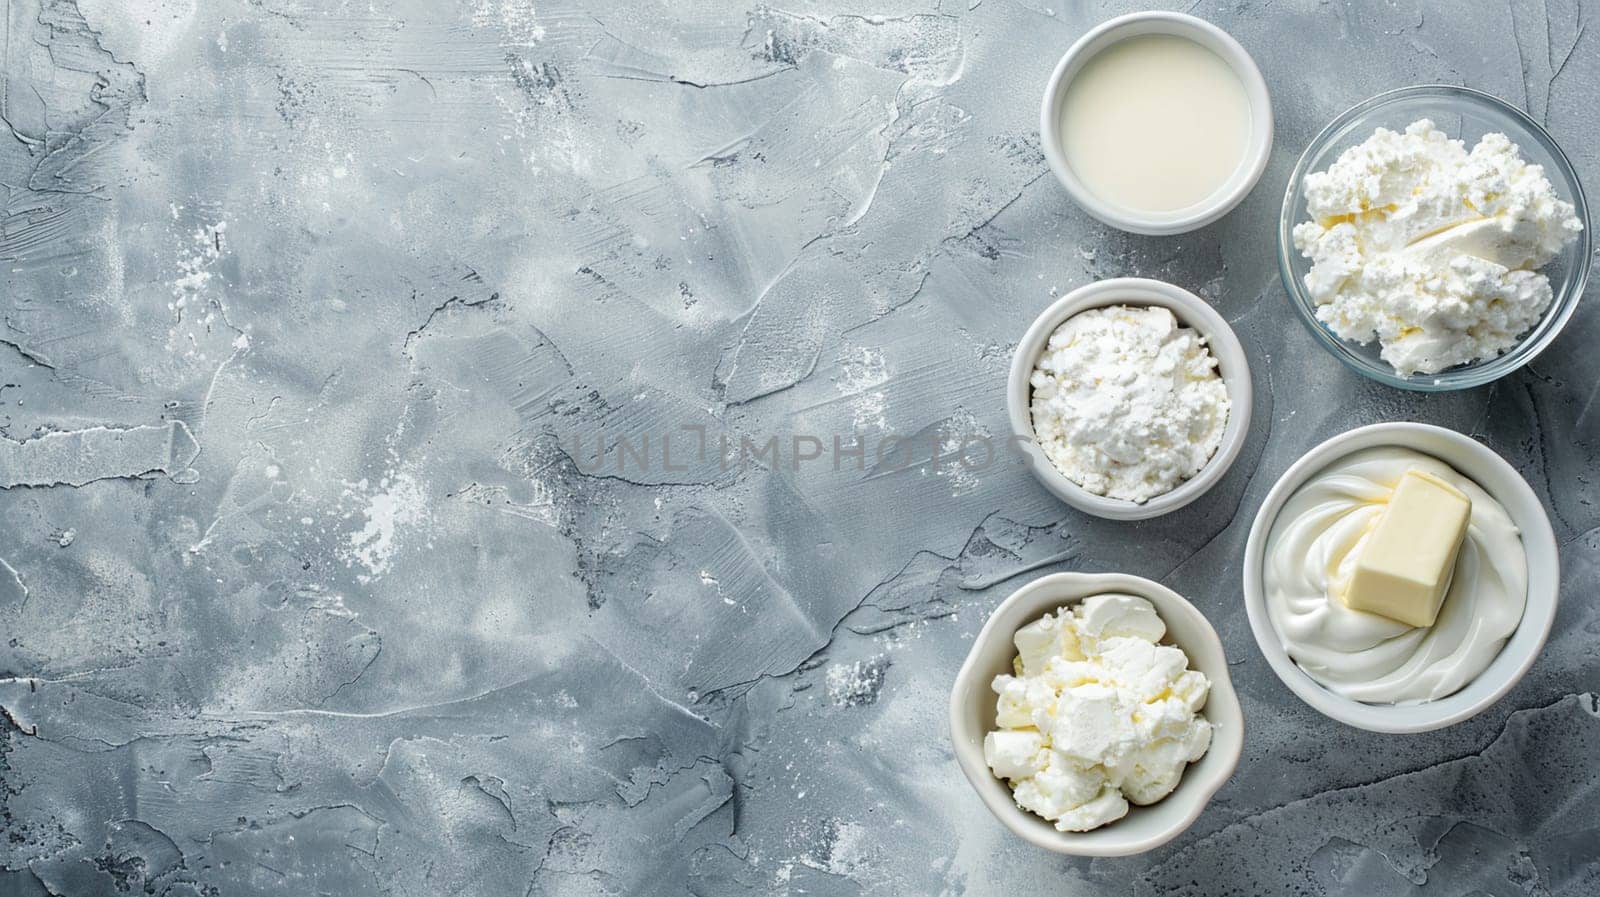 Bowls of fresh cottage cheese, sour cream, butter, and milk on a textured grey surface. Nutrition, healthy eating, dairy concept in natural light.